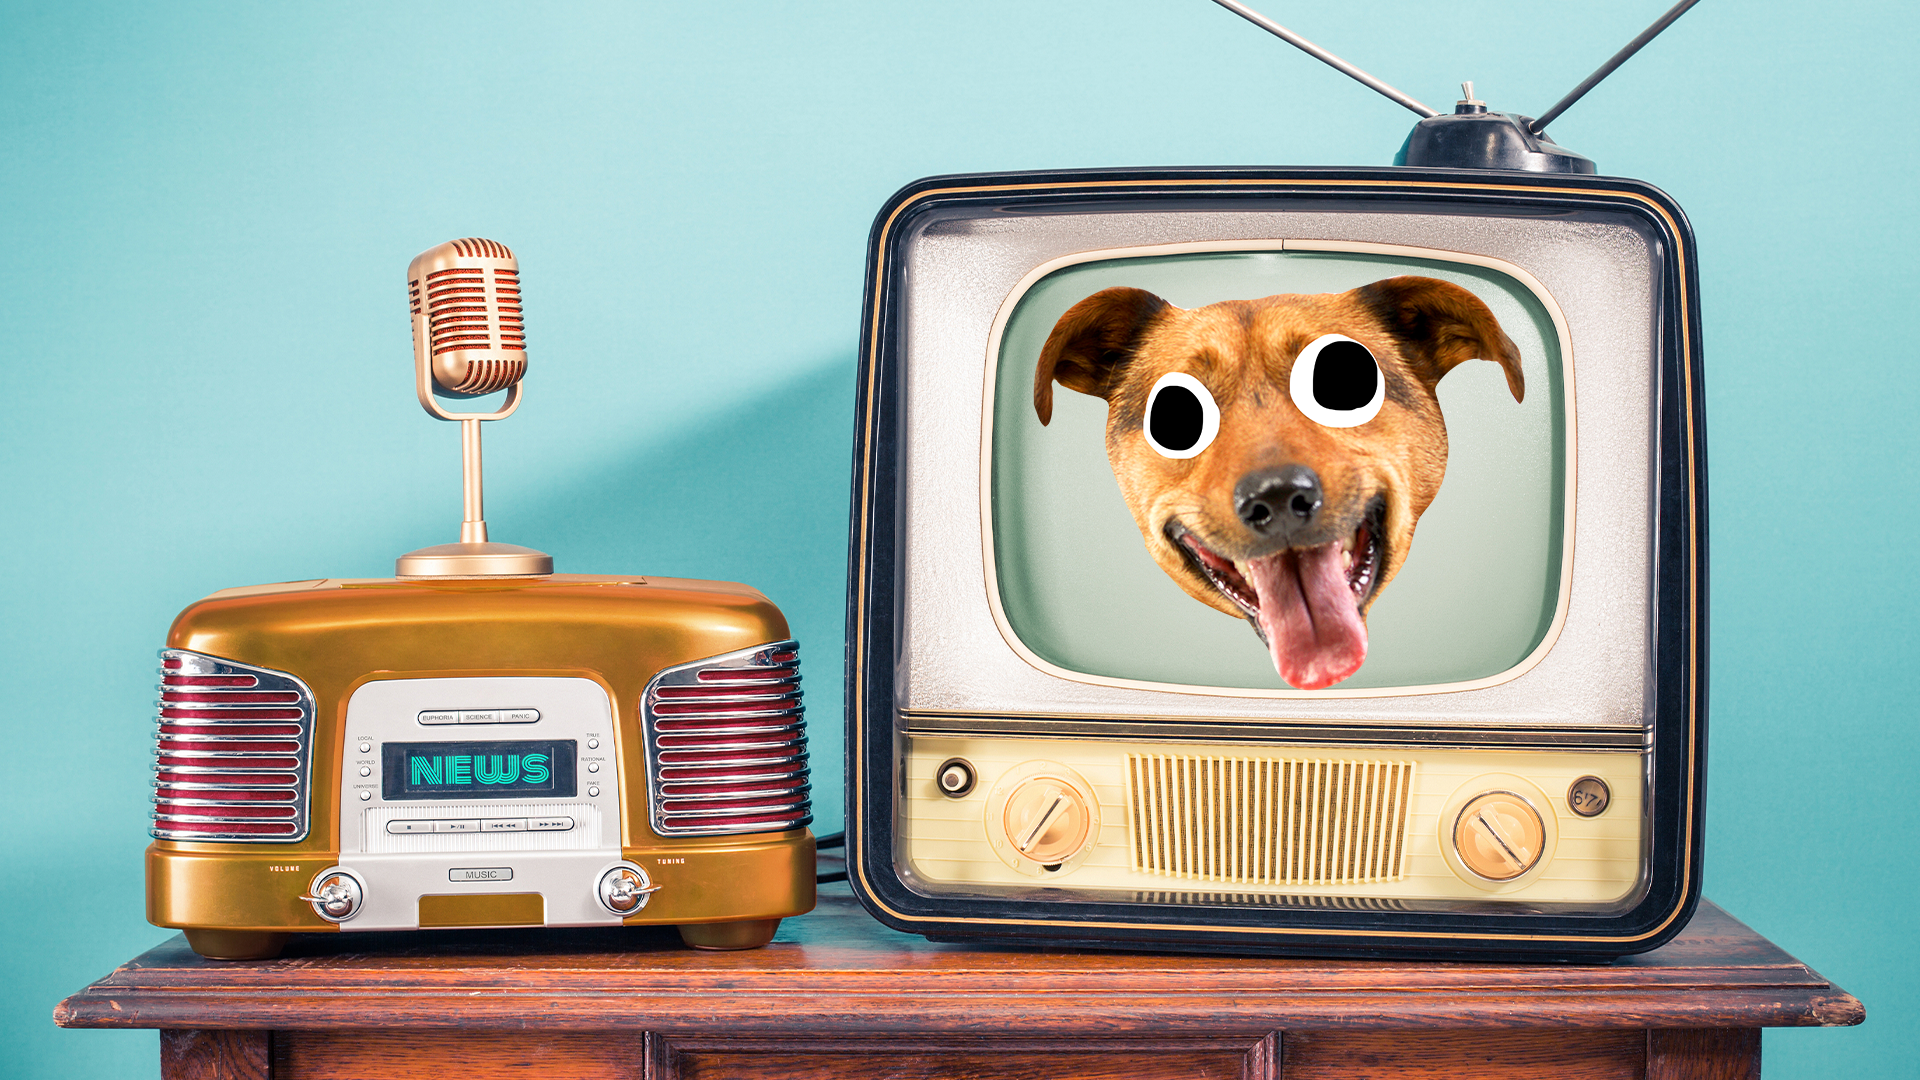 Old fashioned TV with dog face